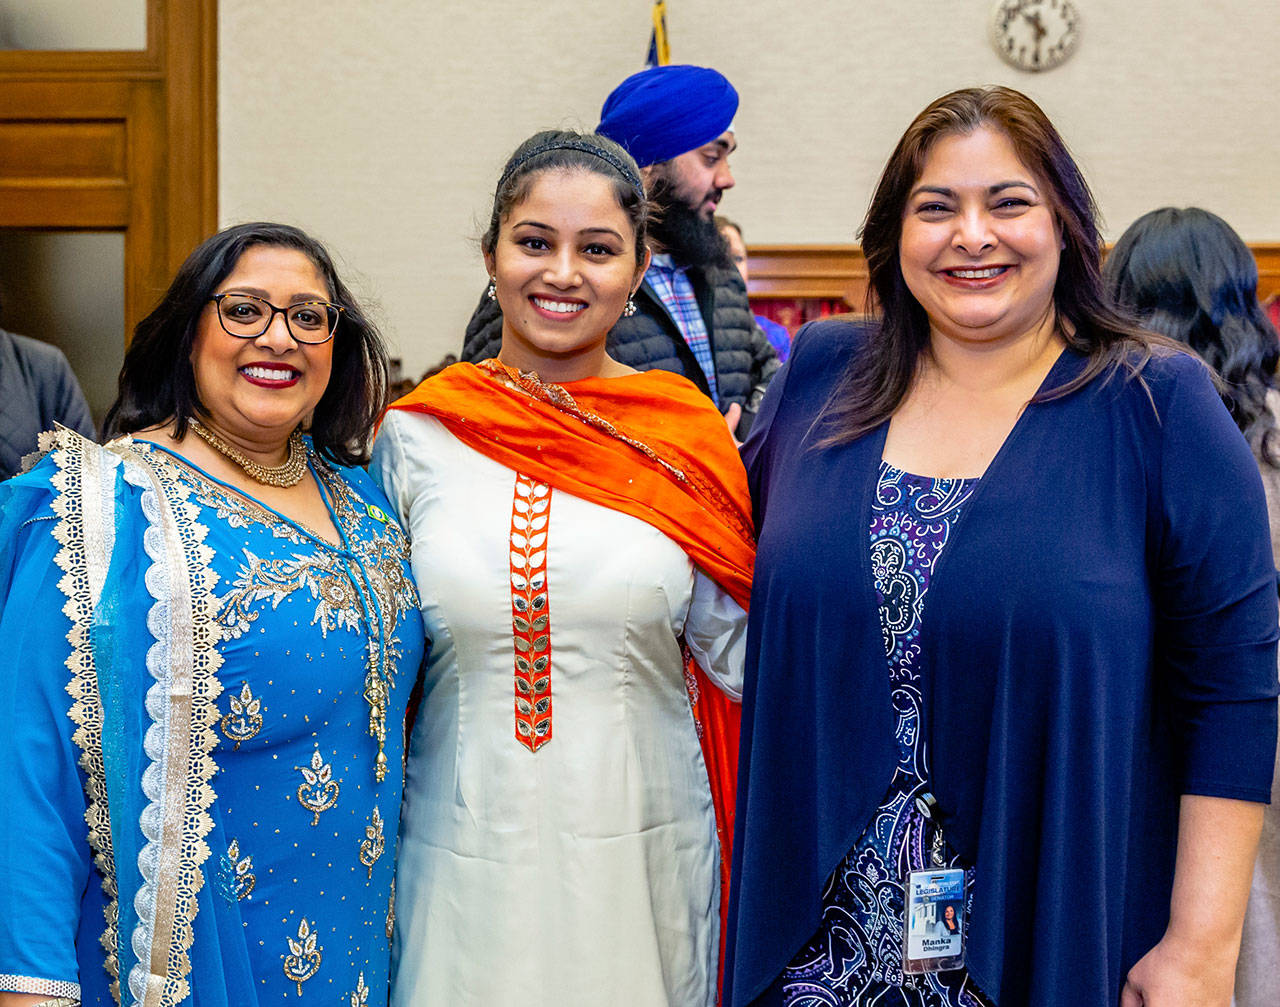 State Sens. Mona Das, D-Kent, left, and Manka Dhingra, D-Redmond, right, with Kent City Councilmember Satwinder Kaur at the Sikh American community reception on Feb. 28. COURTESY PHOTO